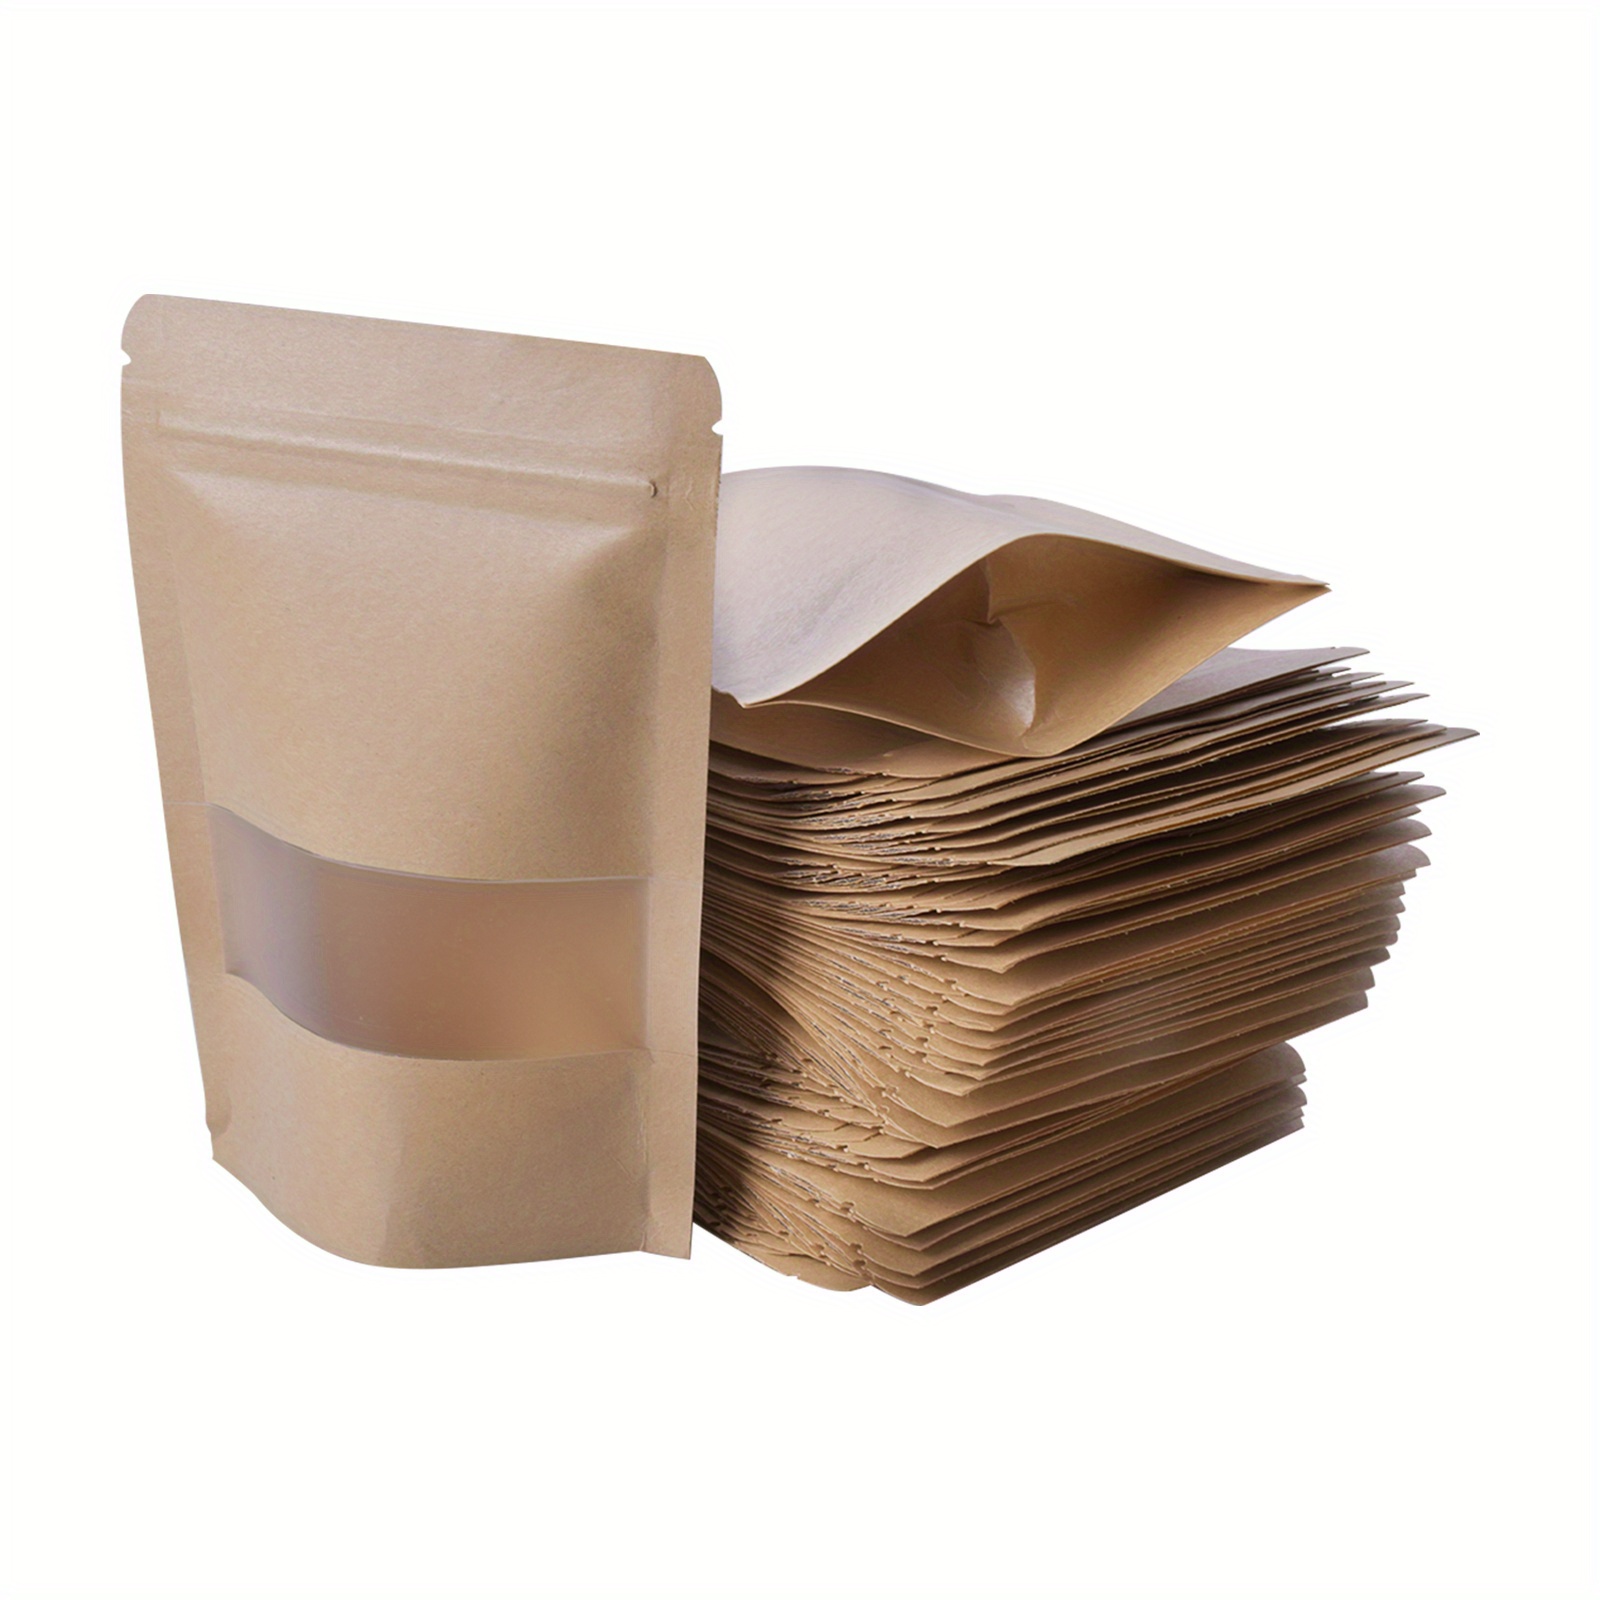 

50pcs Reusable Kraft Paper Stand Up Food Storage Bags With Zipper Closure - Ideal For Dried Fruit, Beans, Tea, Spices, Candy, And Biscuits Packaging!